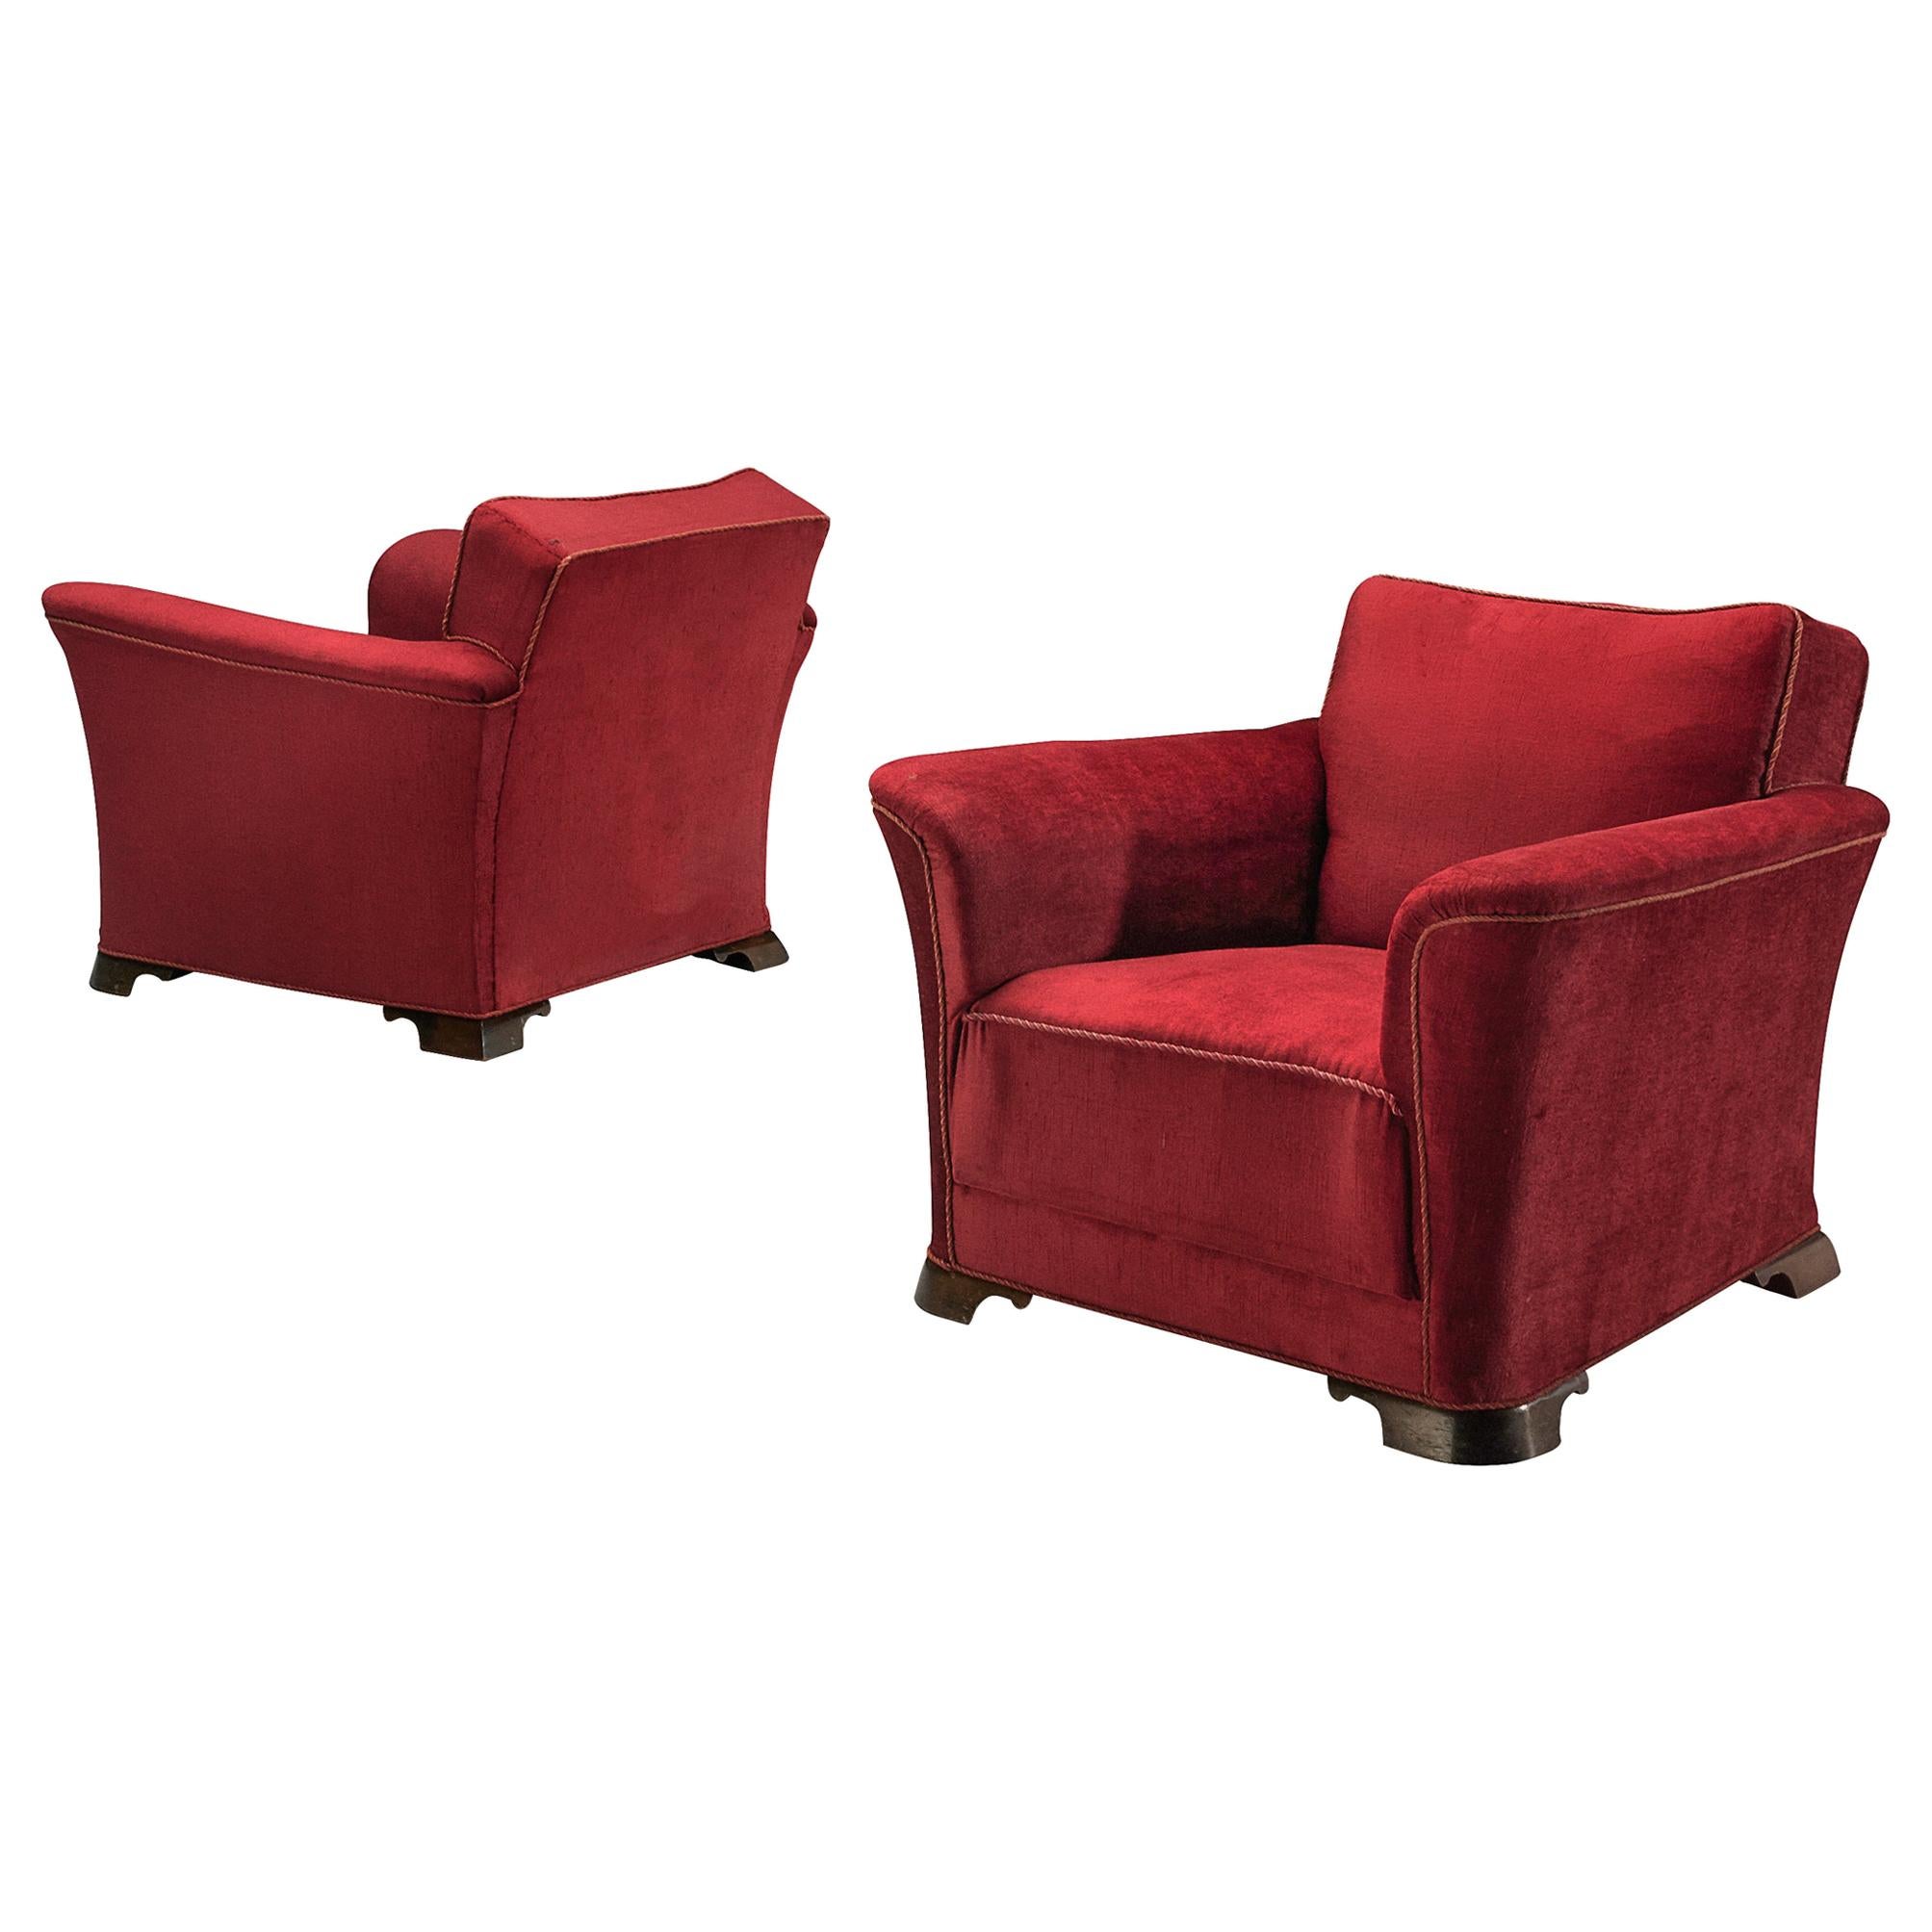 Pair of Art Deco Lounge Chairs in Red Velours